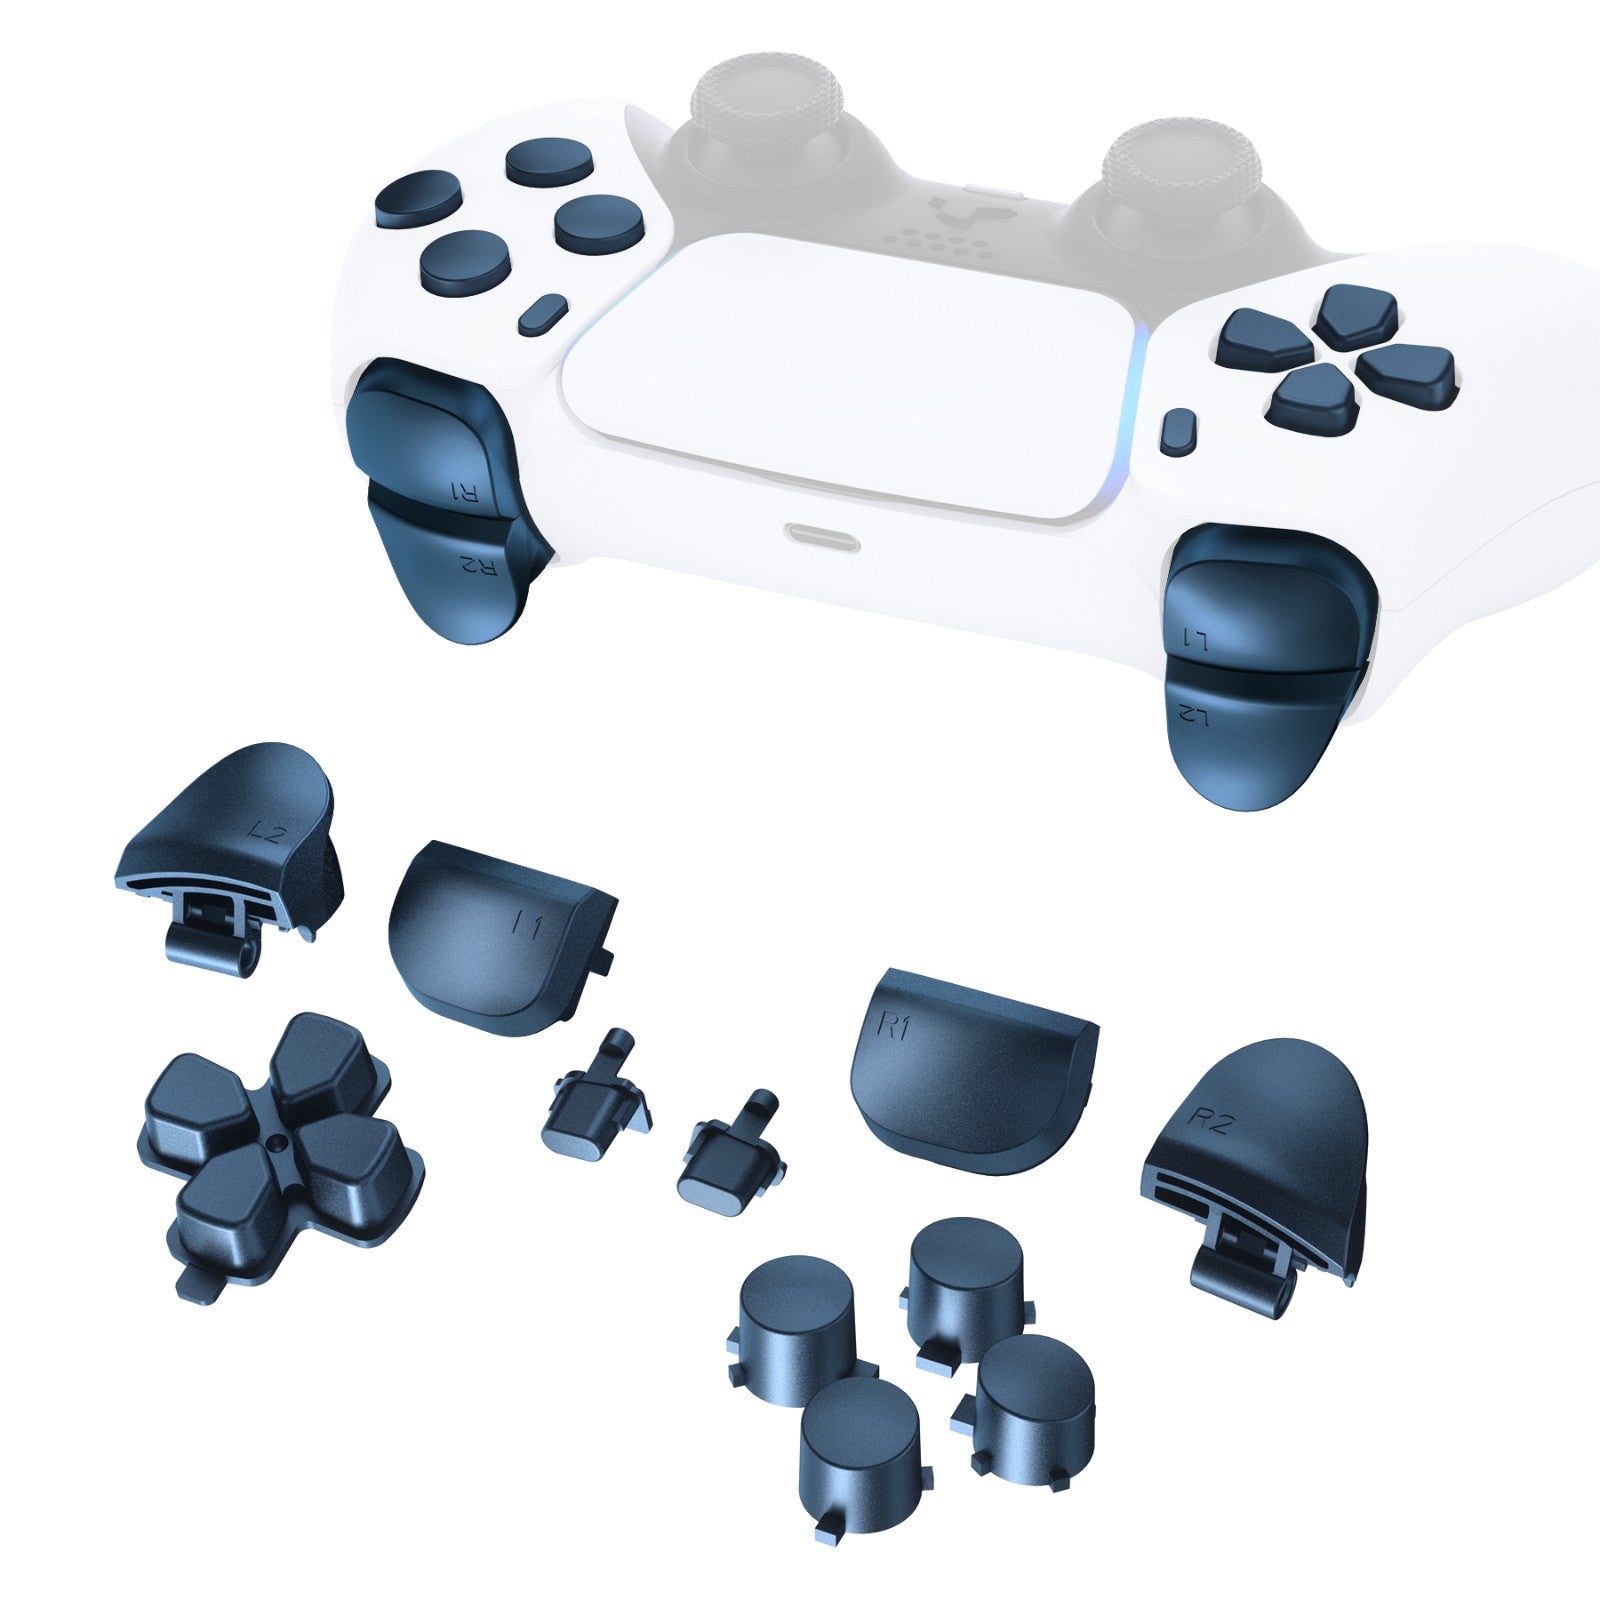 eXtremeRate Retail Replacement D-pad R1 L1 R2 L2 Triggers Share Options Face Buttons, Metallic Regal Blue Full Set Buttons Compatible with ps5 Controller BDM-010 & BDM-020 - JPF1042G2